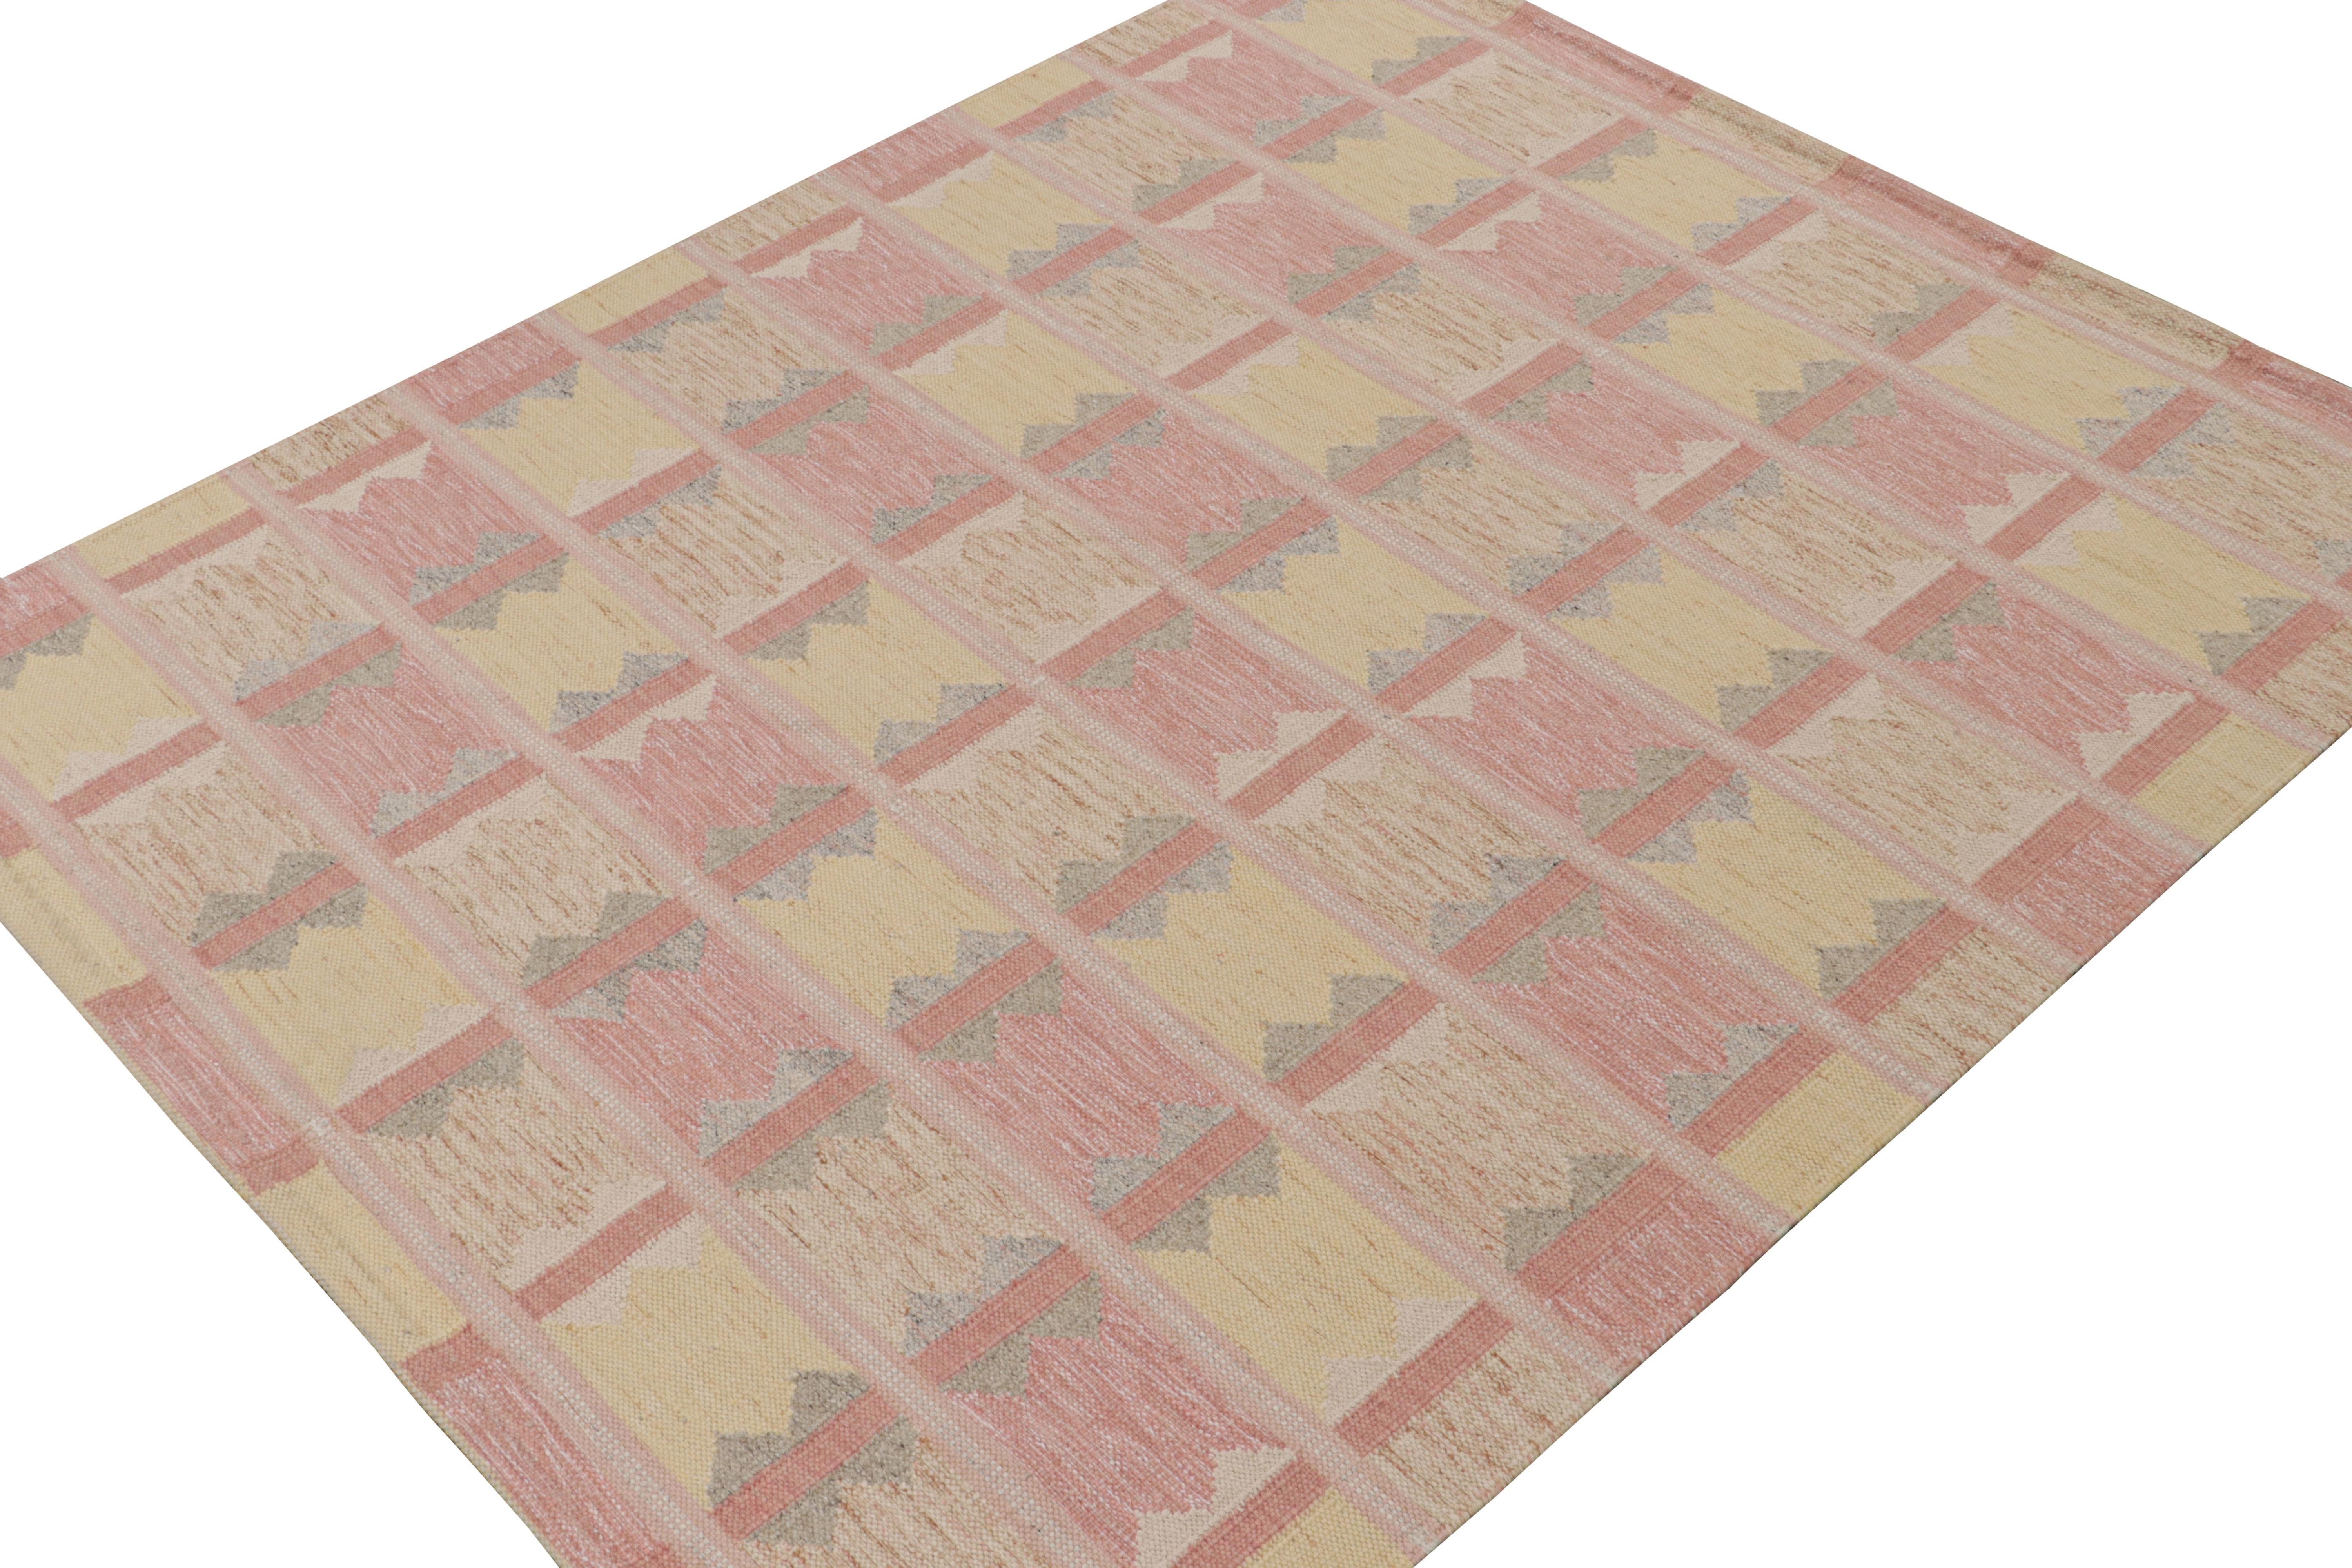 Rug & Kilim’s Scandinavian Style Kilim in Cream and Pink Geometric Patterns In New Condition For Sale In Long Island City, NY